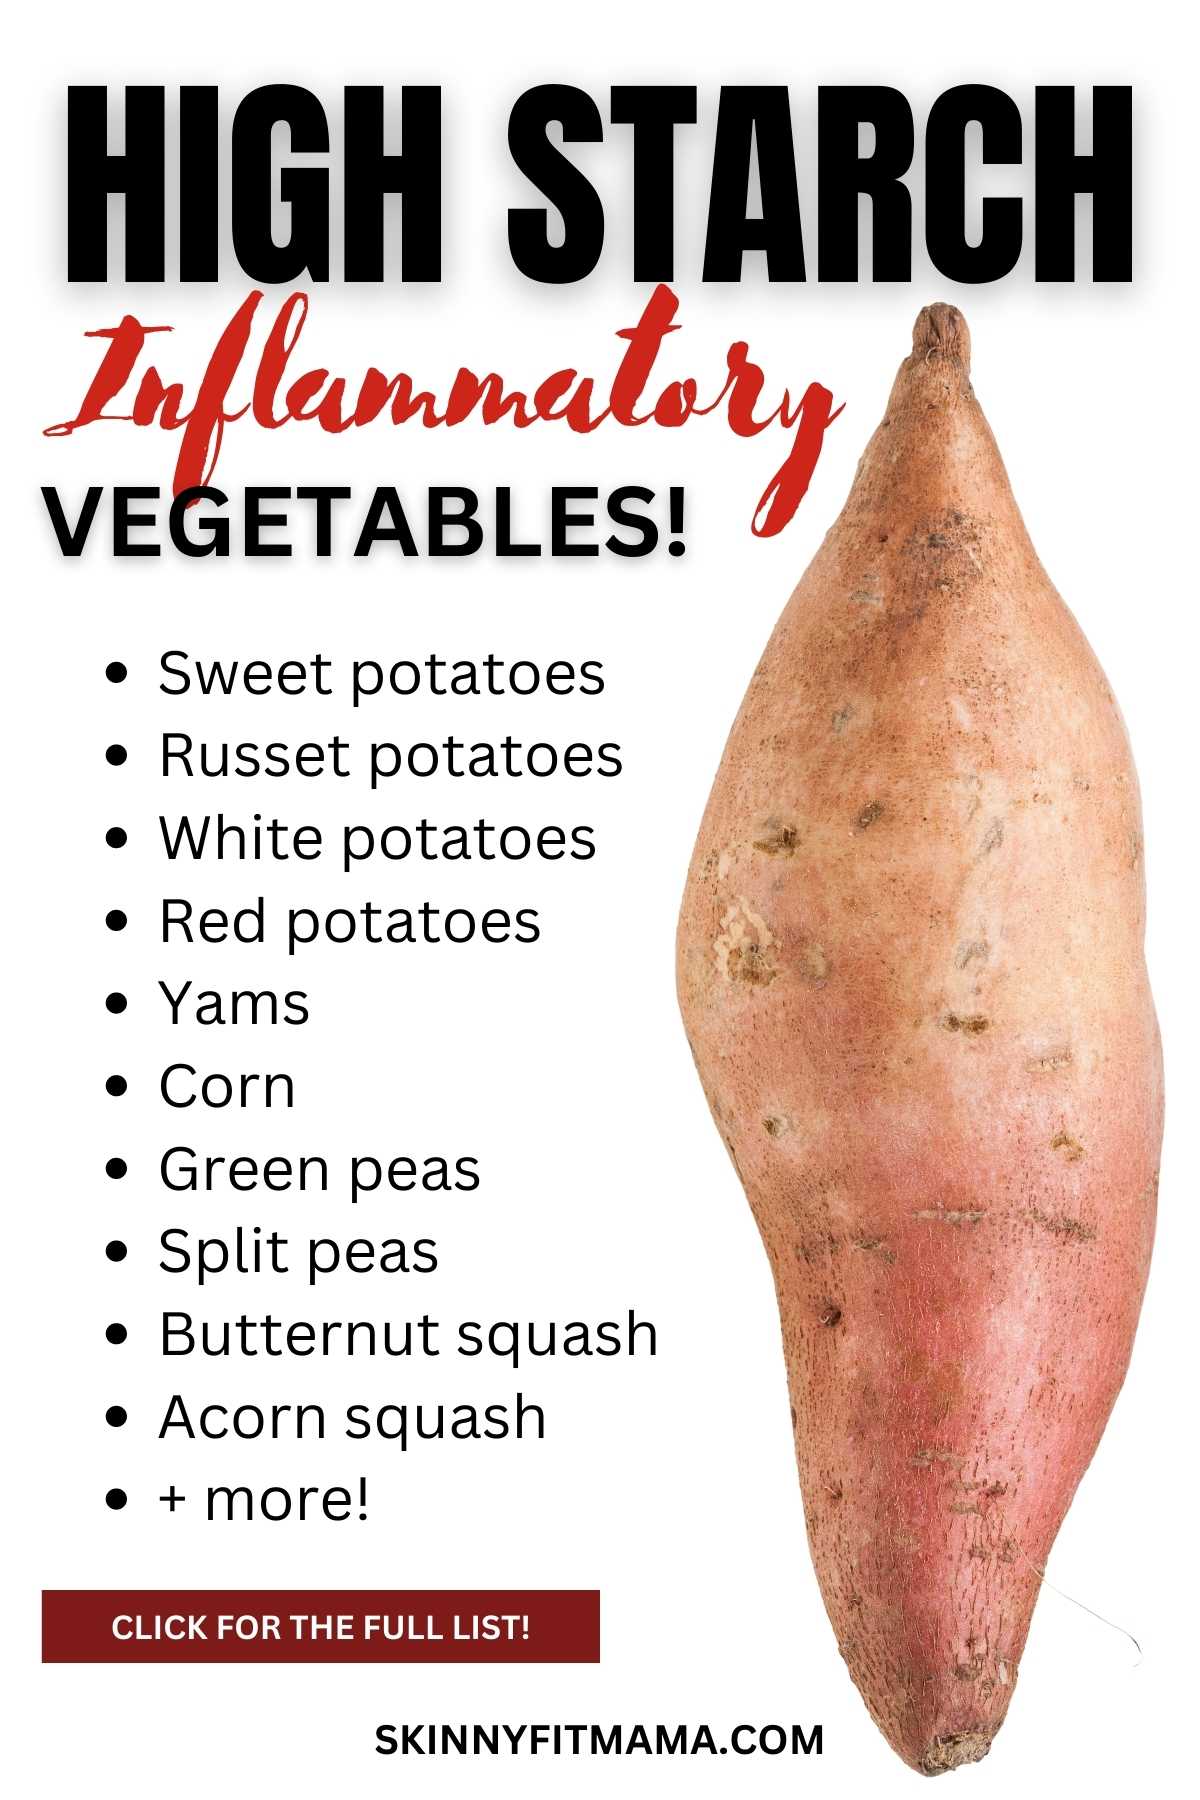 Vegetables That Cause Inflammation - High Starch